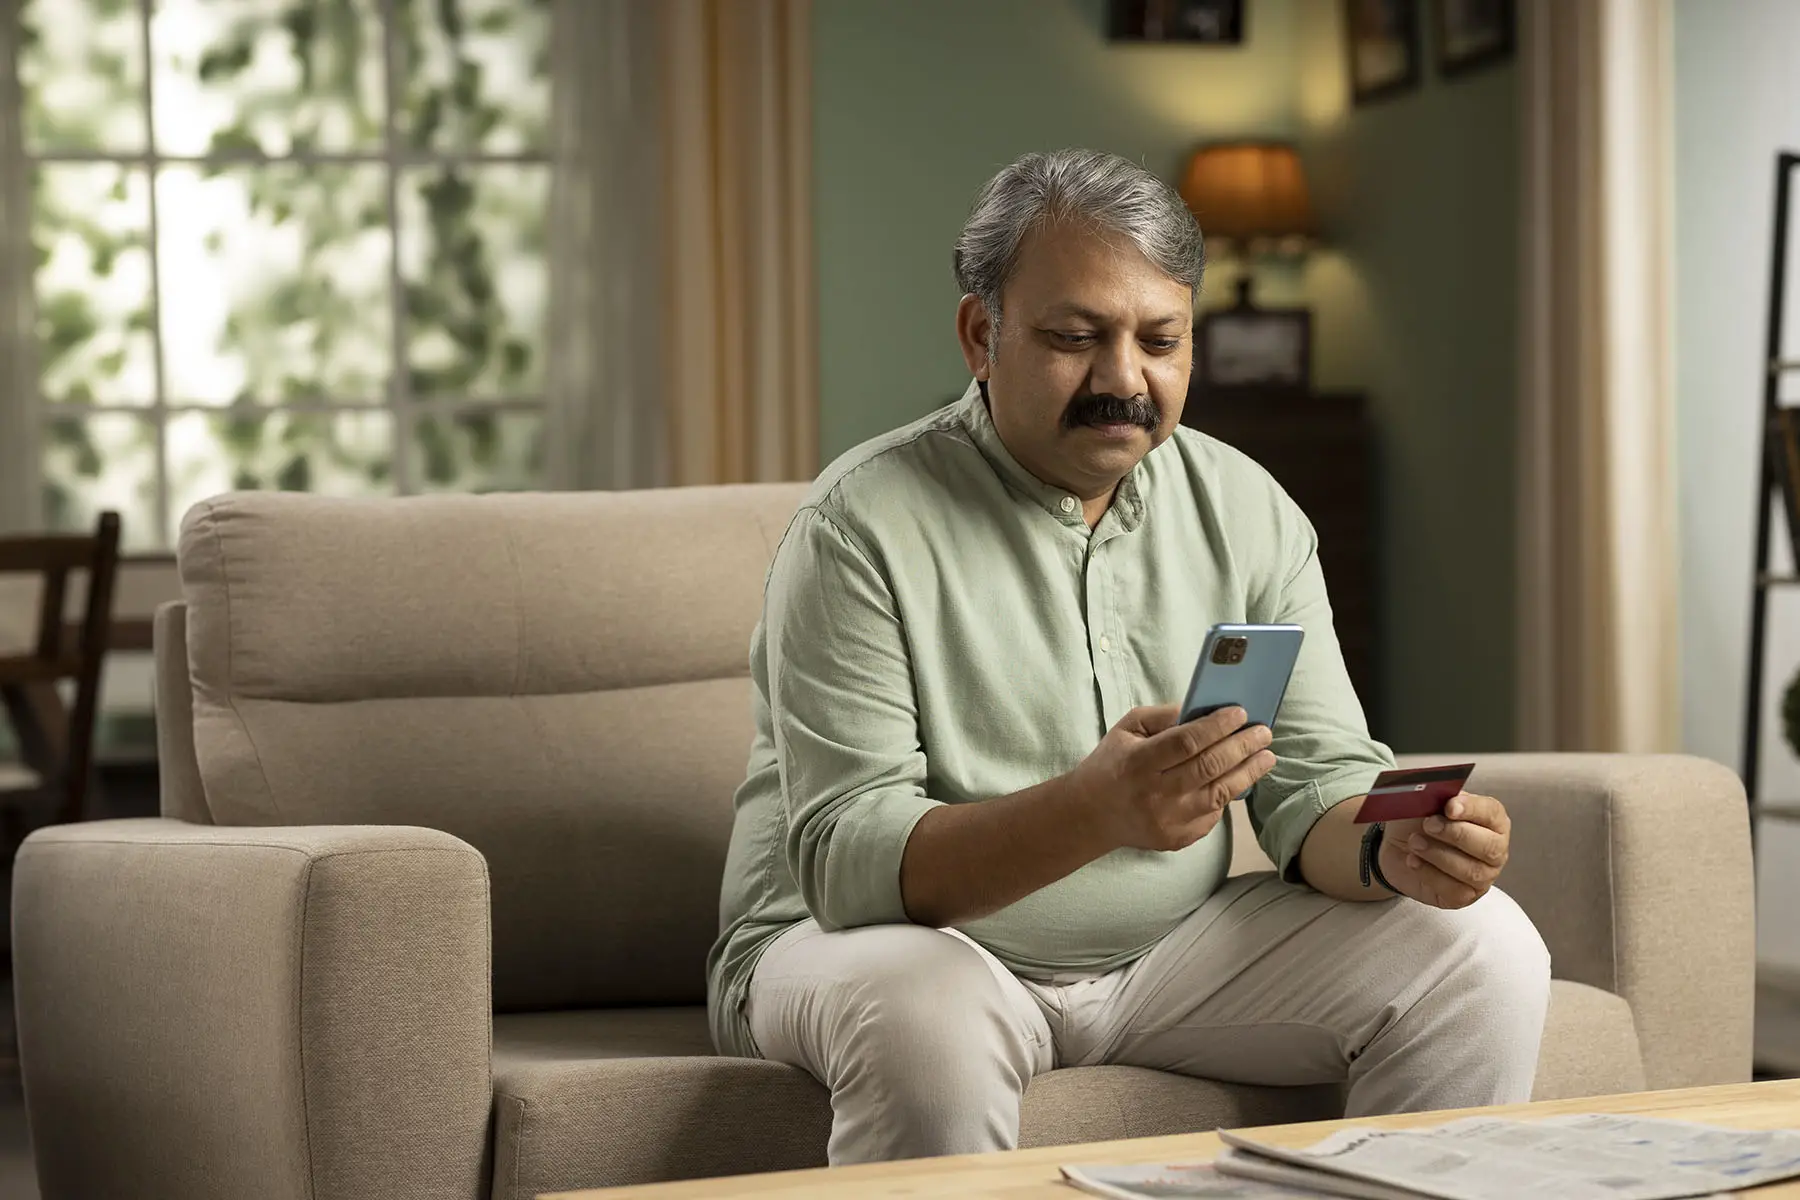 Man checking his bank saldo on his phone while sitting on the couch.